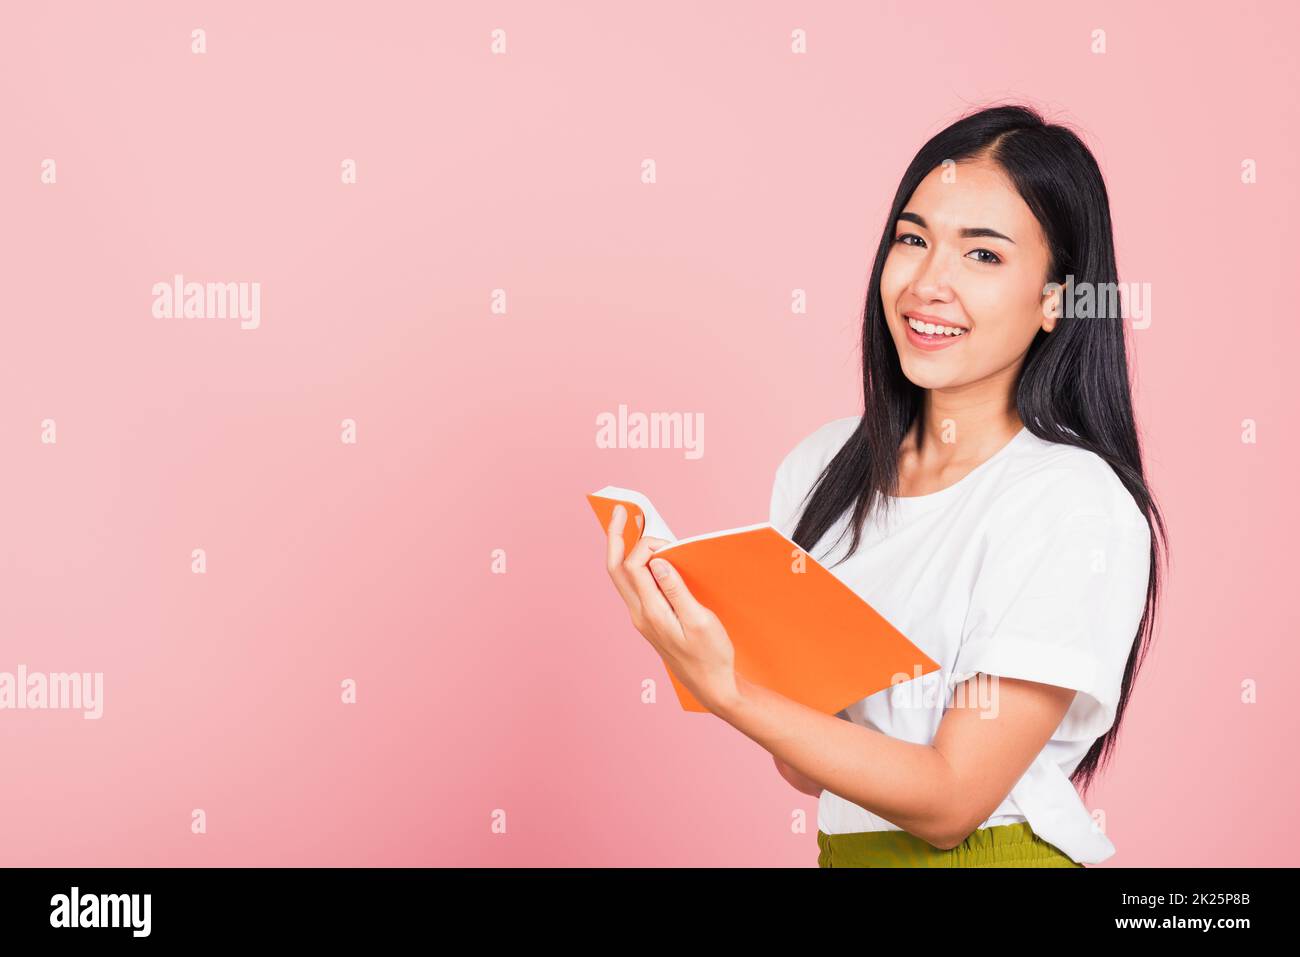 woman confident smiling standing holding orange book open Stock Photo